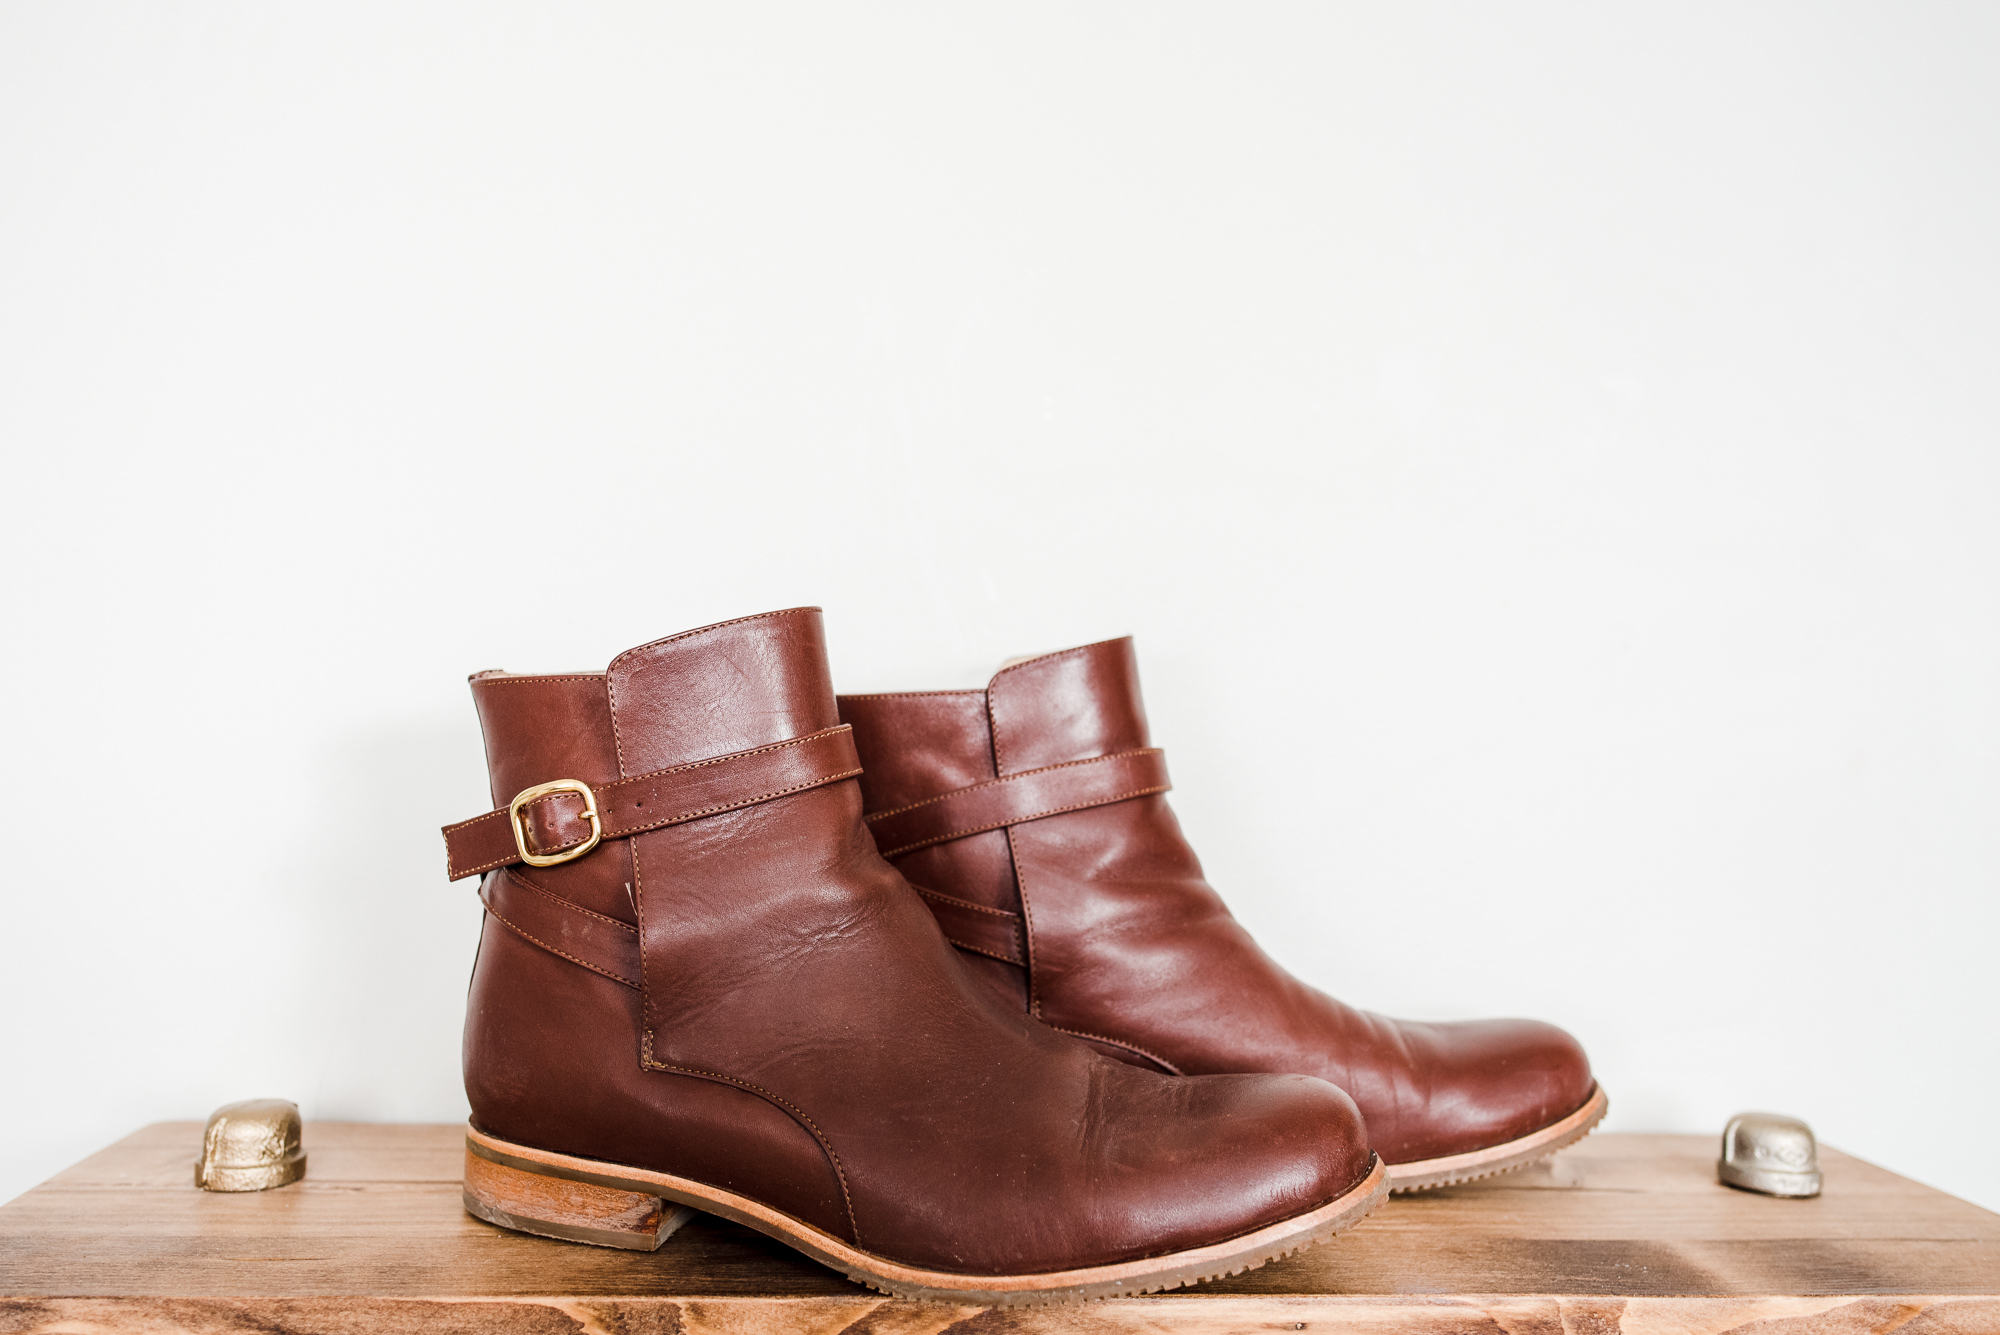 The moto boot by Poppy Barley in Chestnut. Photographer's favourite things